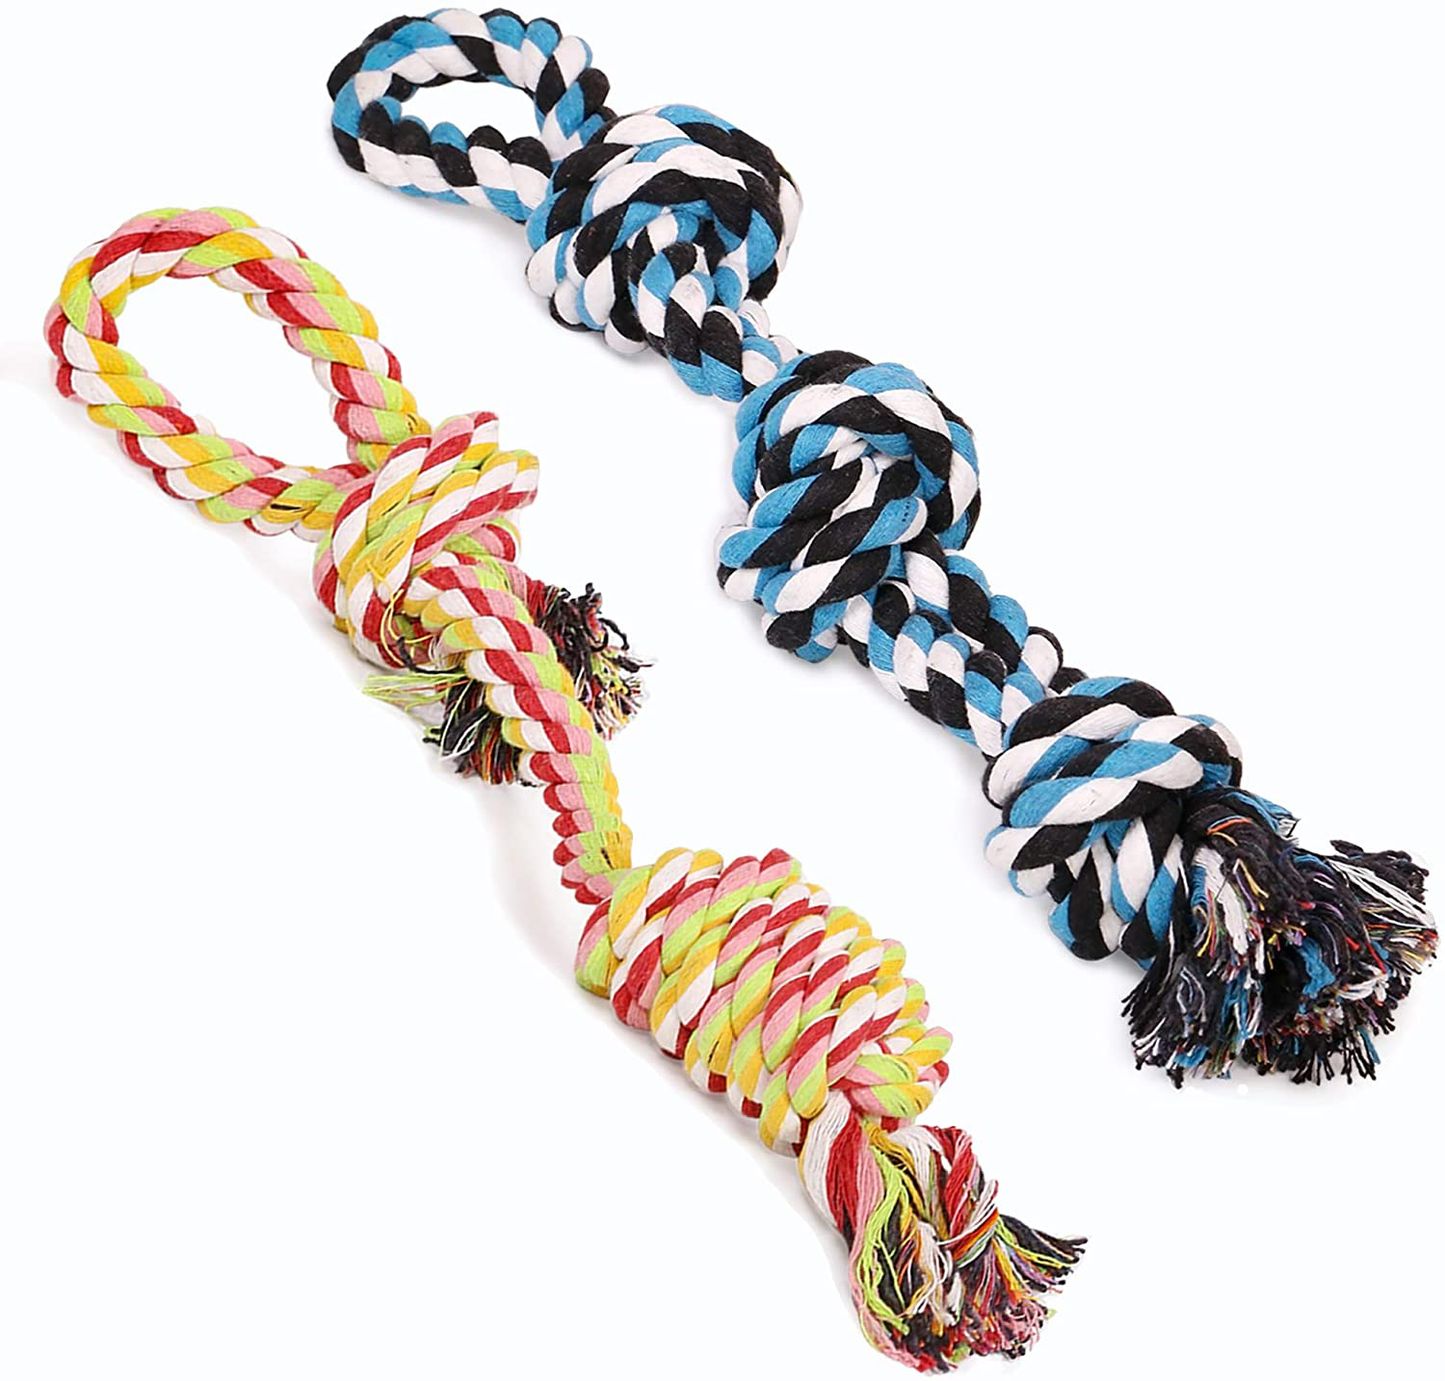 UPSKY Dog Rope Toys Dog Grinding Teeth 2 Nearly Indestructible Dog Toys, Rope Toy for Large Dogs, Dental Cleaning Chew Toys, Dog Tug Toy for Boredom, Dog Rope Toy for Aggressive Chewers (2 Packs) Animals & Pet Supplies > Pet Supplies > Dog Supplies > Dog Toys UPSKY   